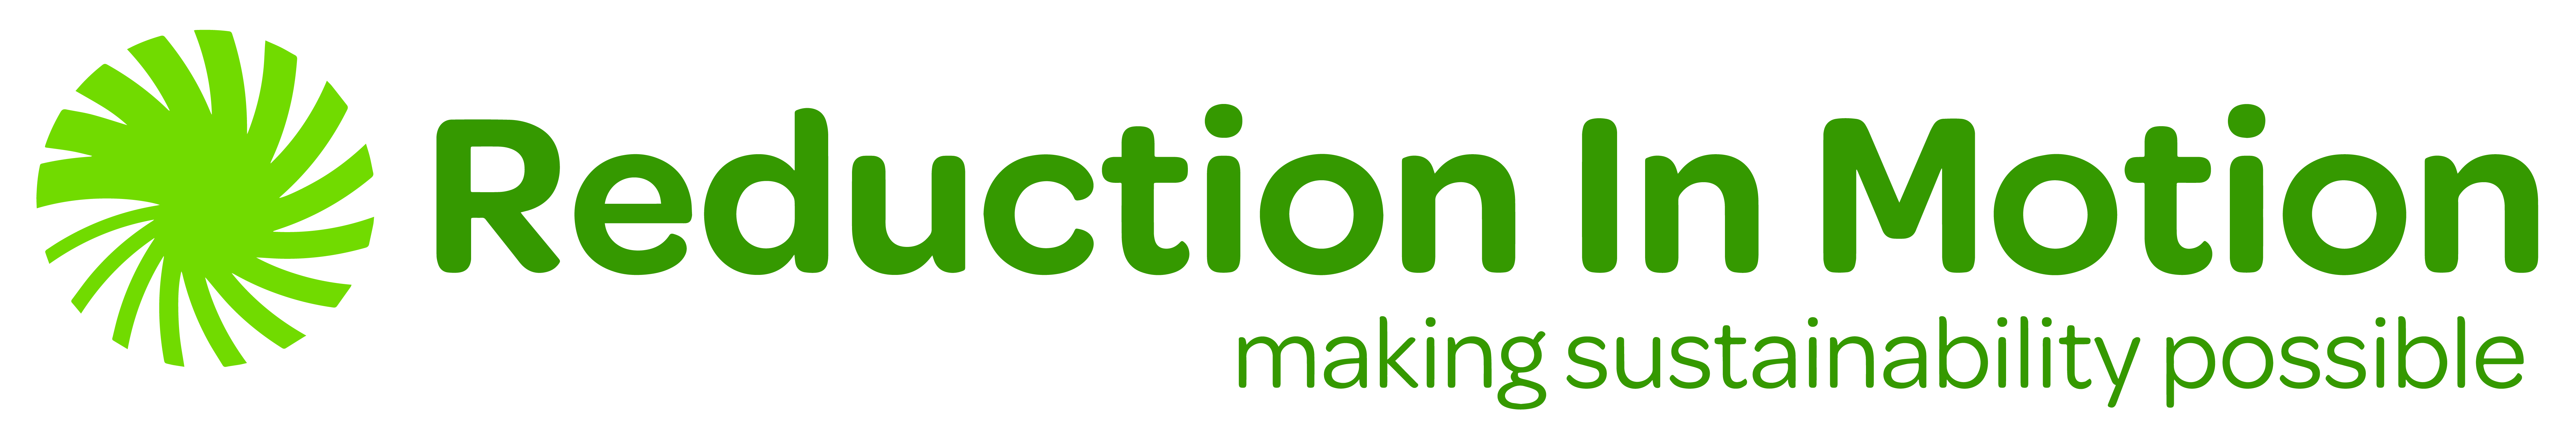 Reduction In Motion Logo Green